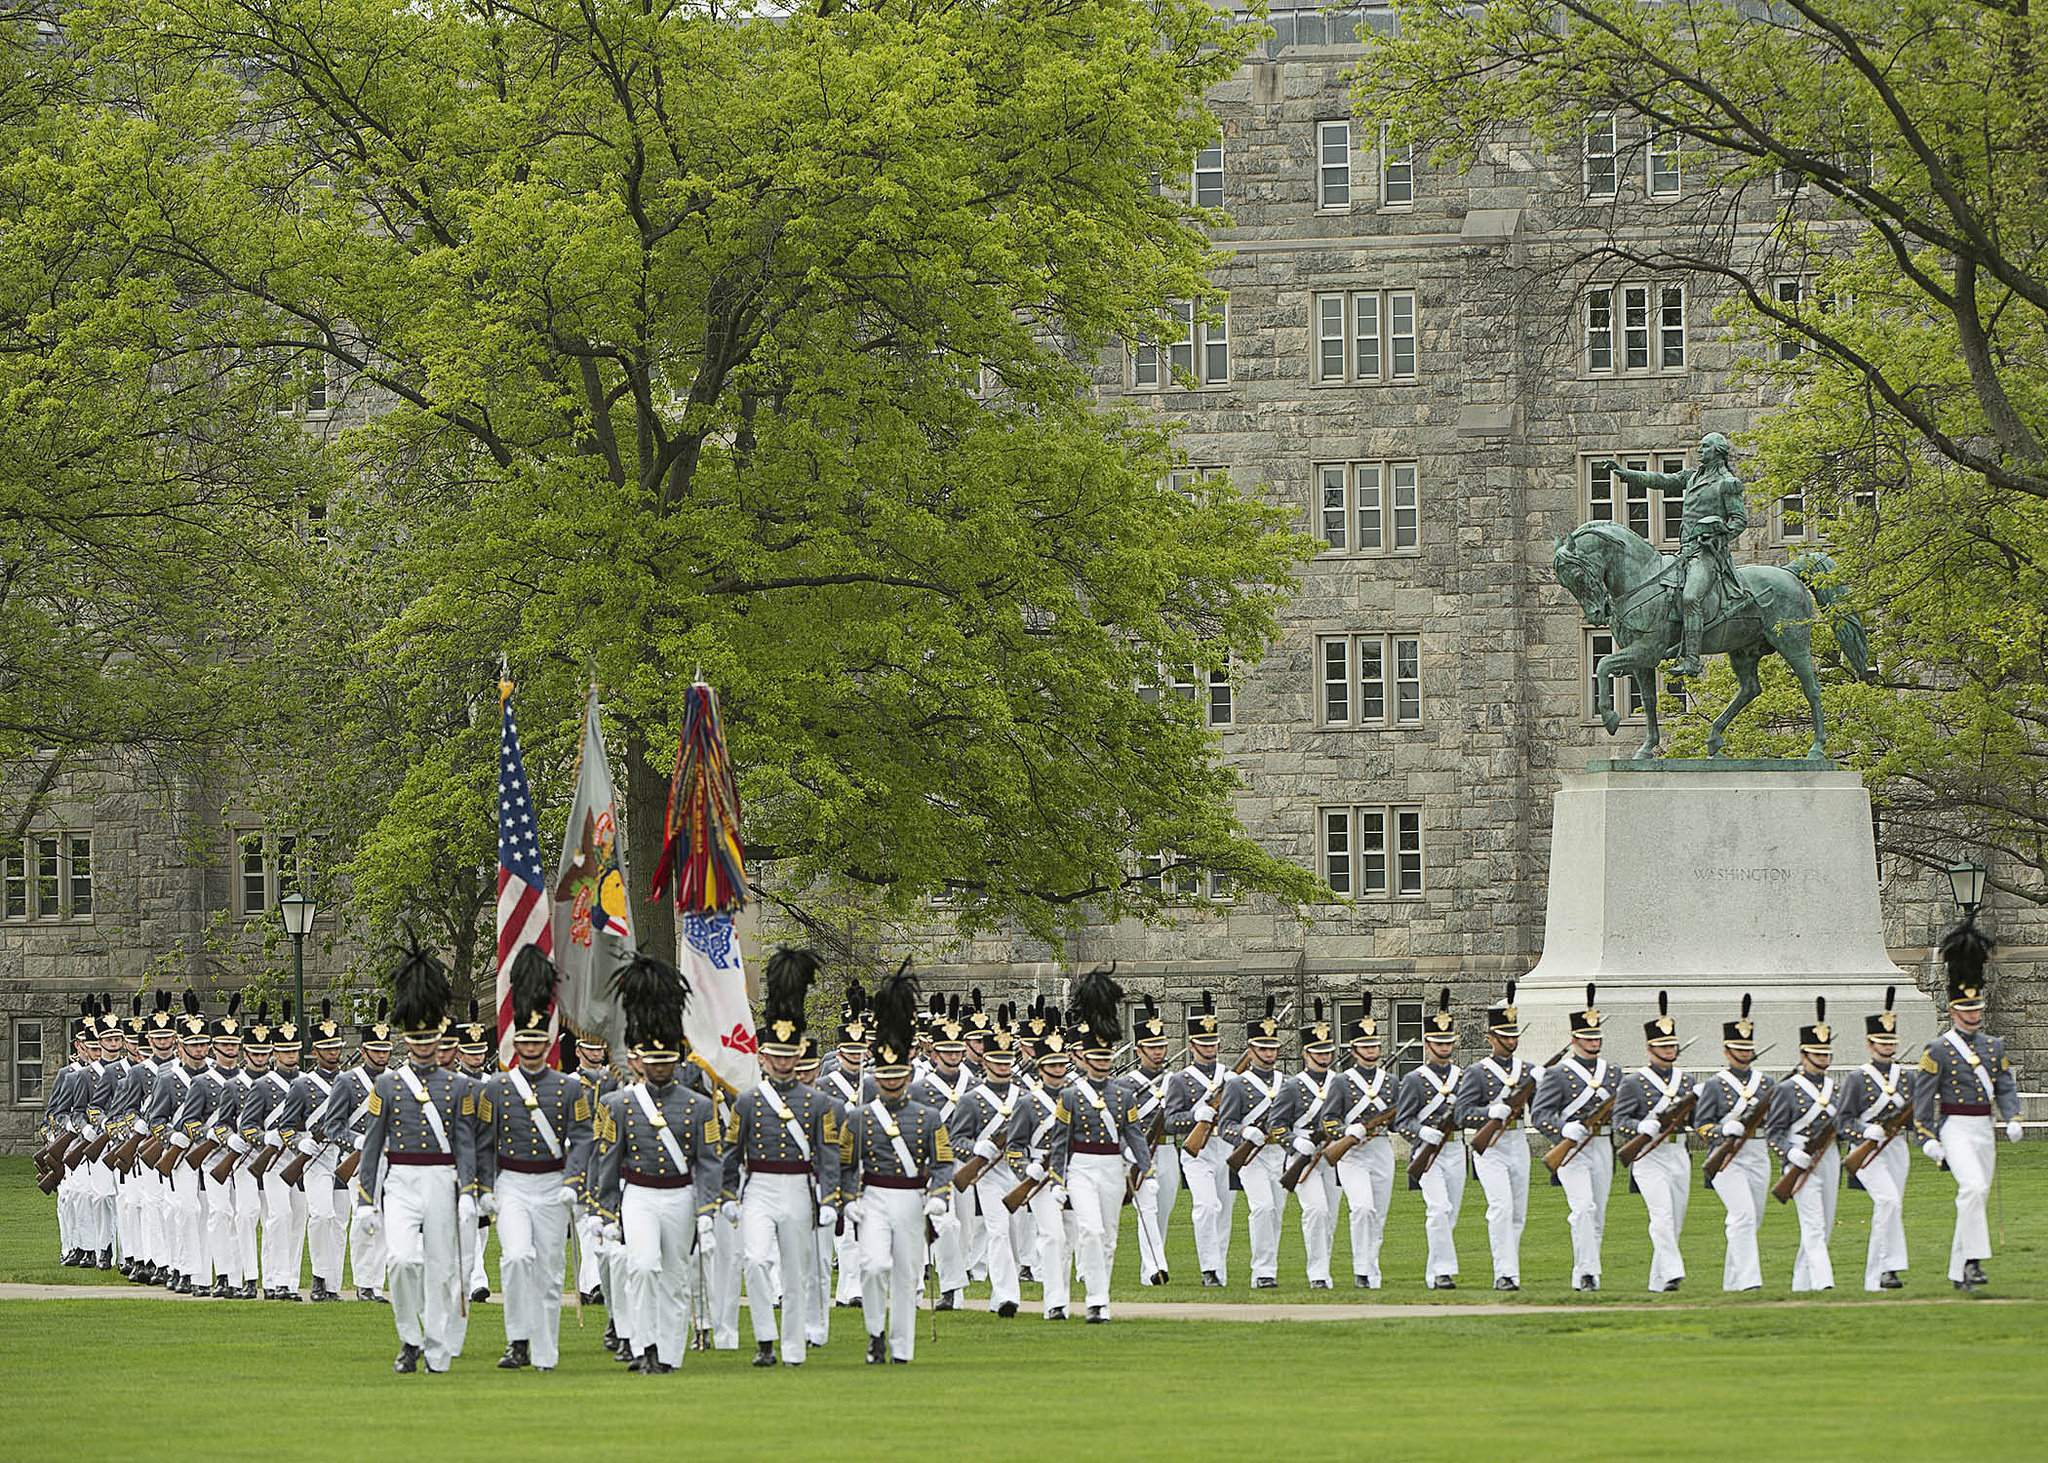 west point The U.S. Military Academy at West Point